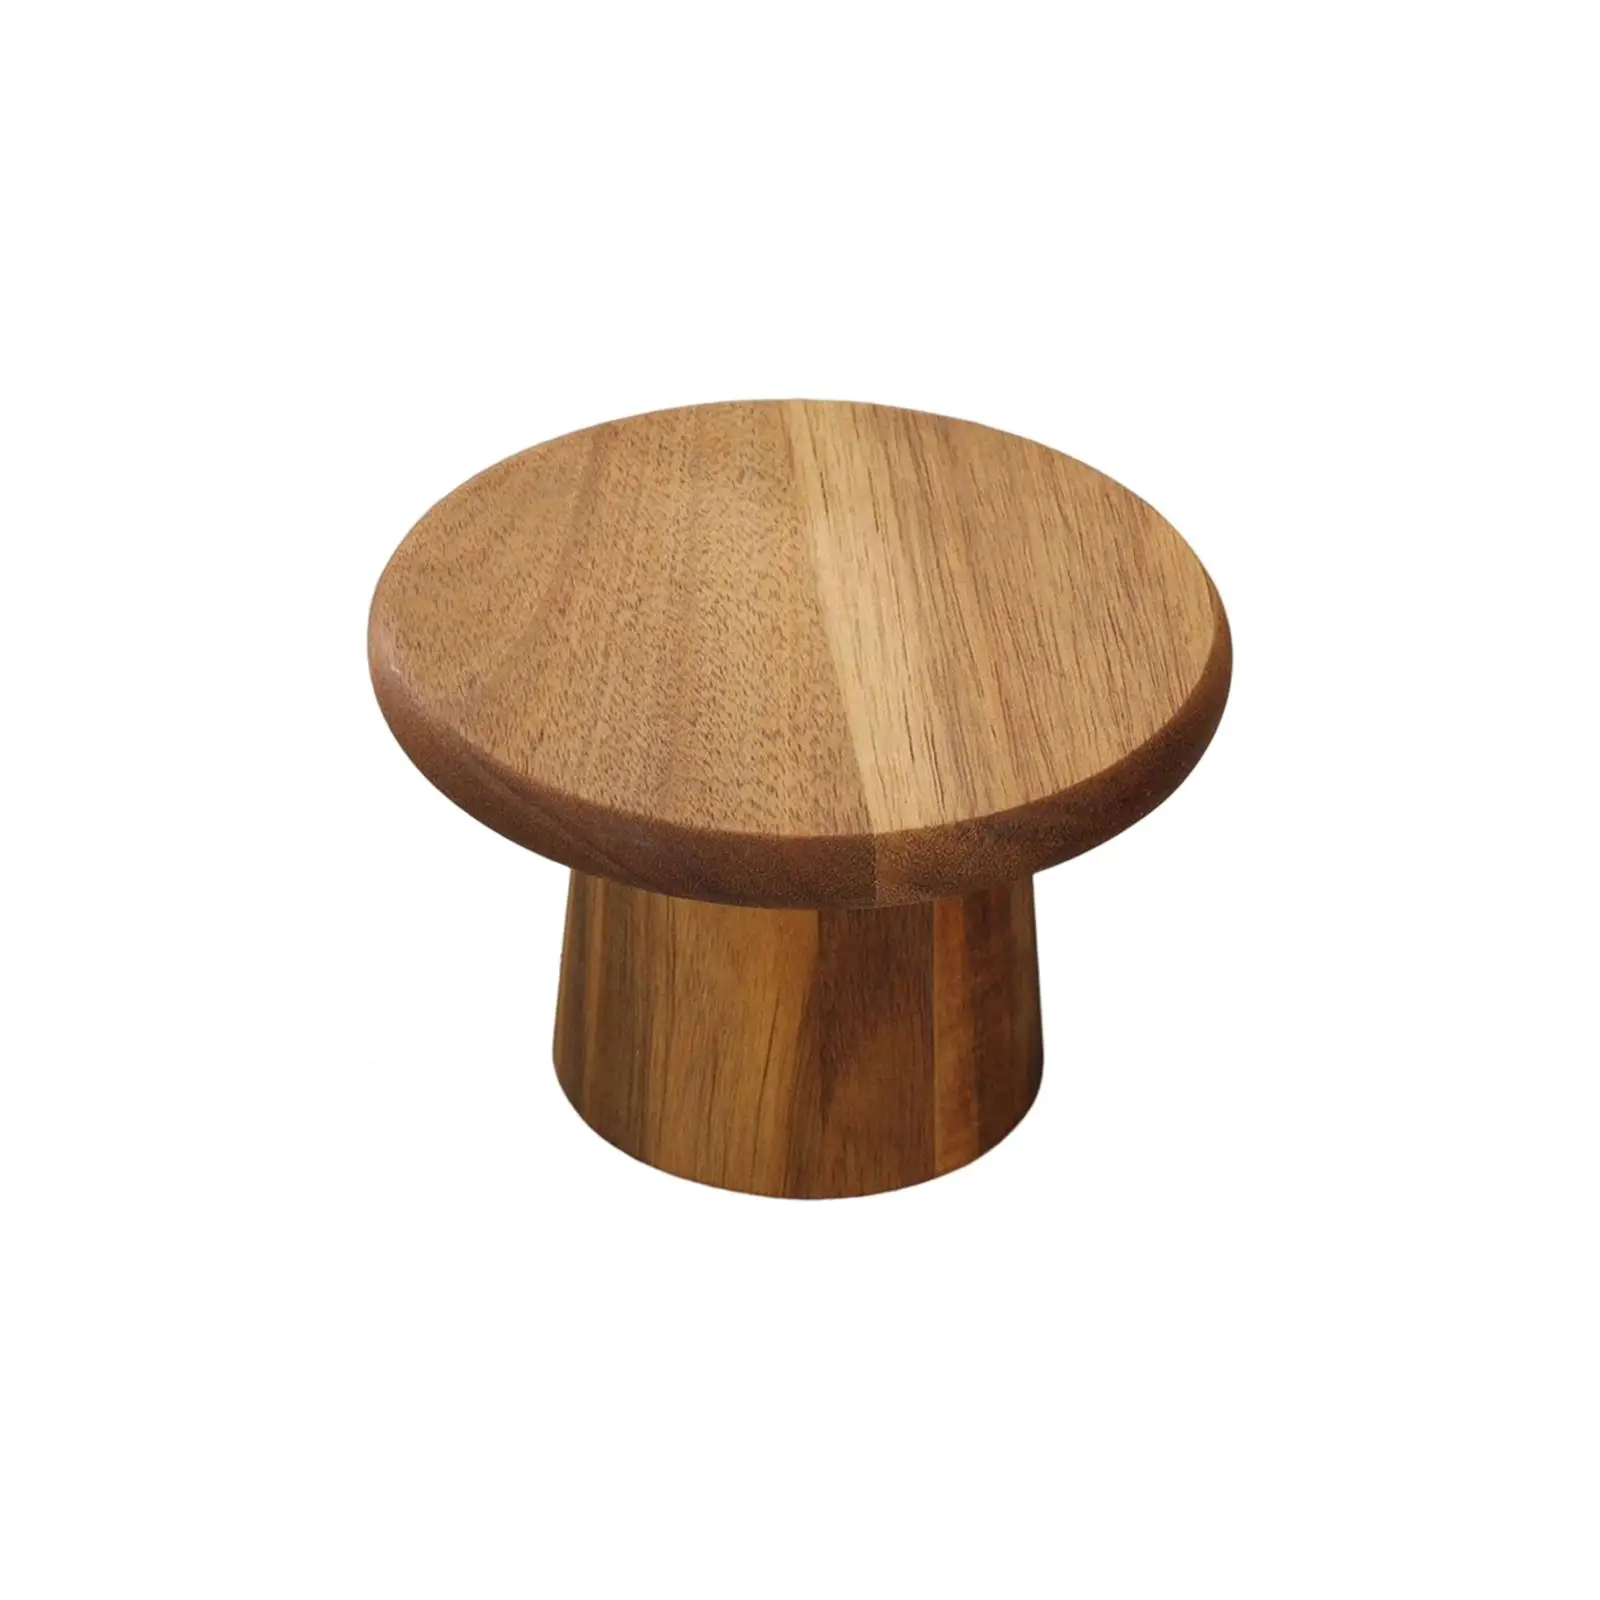 Wooden Cake Stand Cupcake Stand Serving Platter for Baking Gifts Birthday